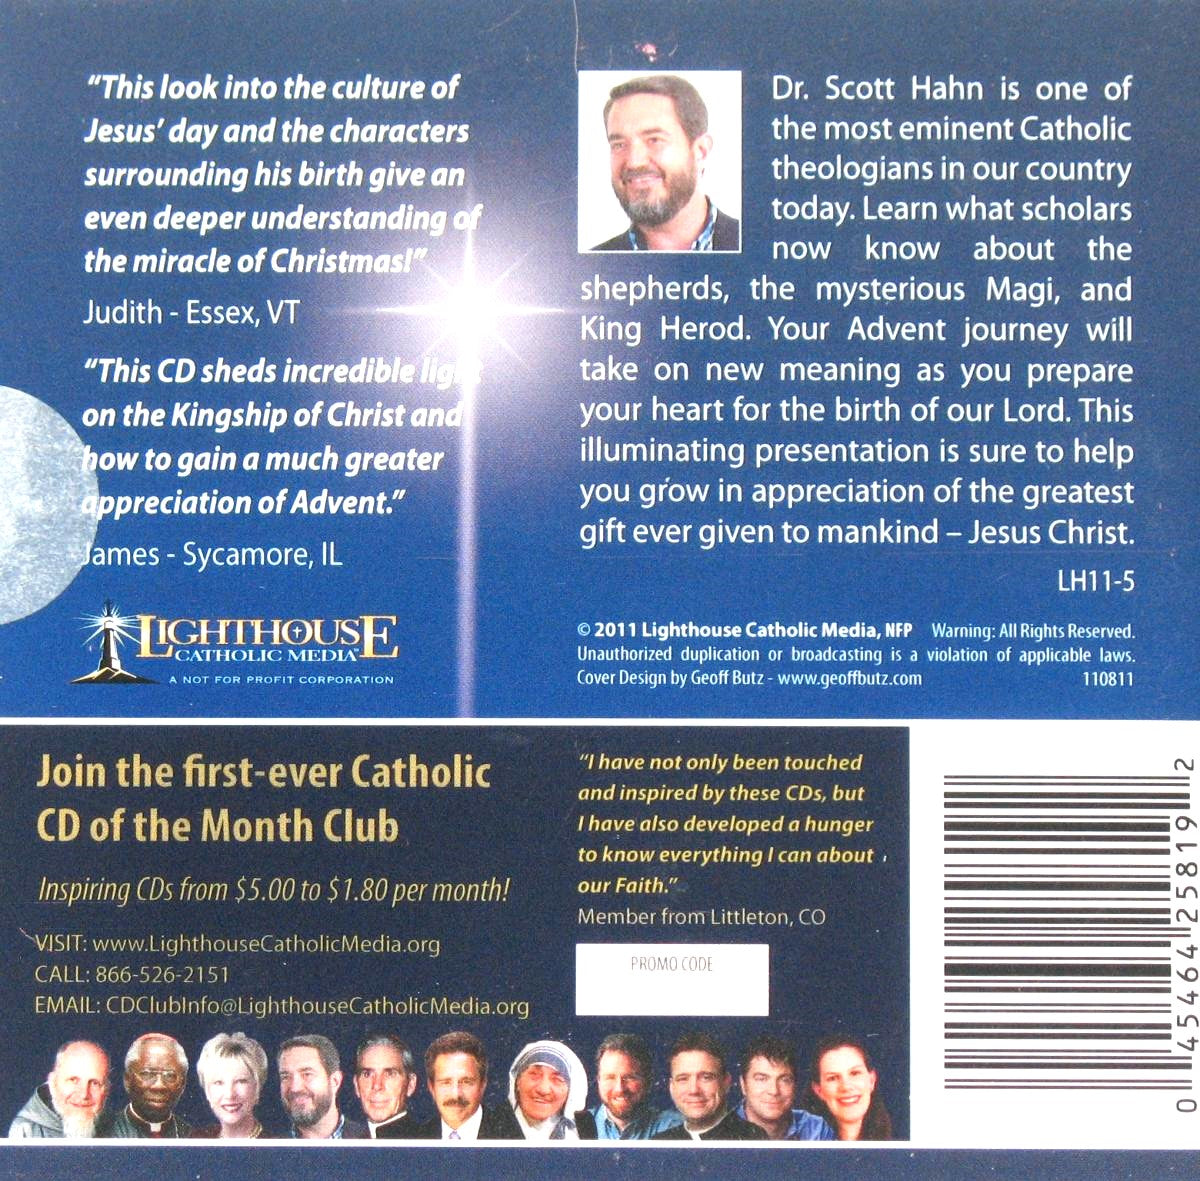 Prepare the Way of the King : Making the Most of Advent - CD Talk by Dr. Scott Hahn